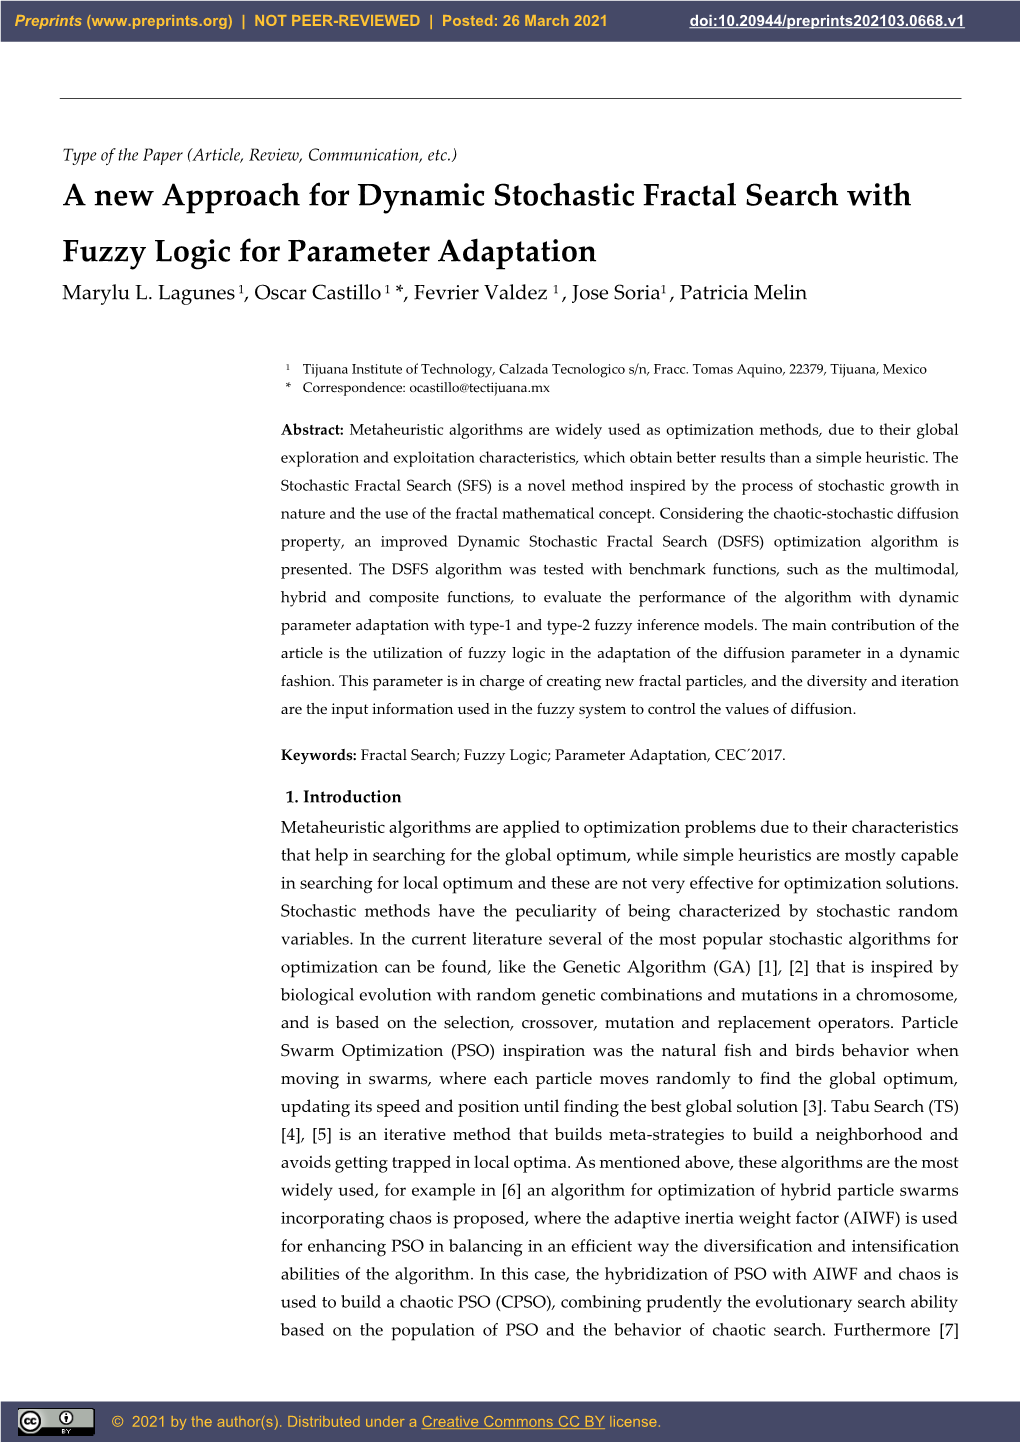 A New Approach for Dynamic Stochastic Fractal Search with Fuzzy Logic for Parameter Adaptation Marylu L